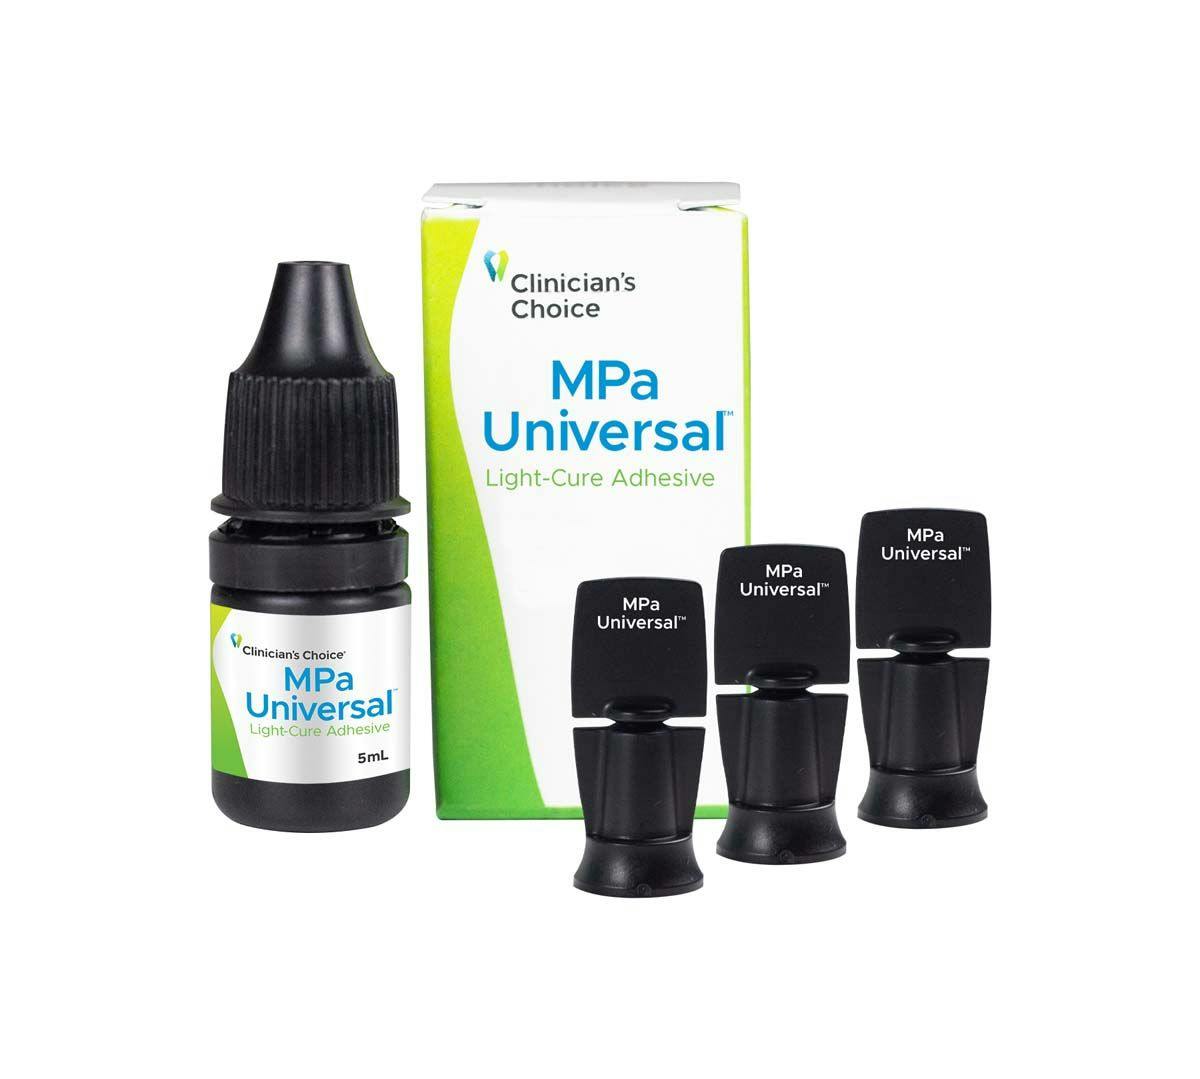 Clinician’s Choice Launches MPa Universal Adhesive. Image credit: © Clinician's Choice